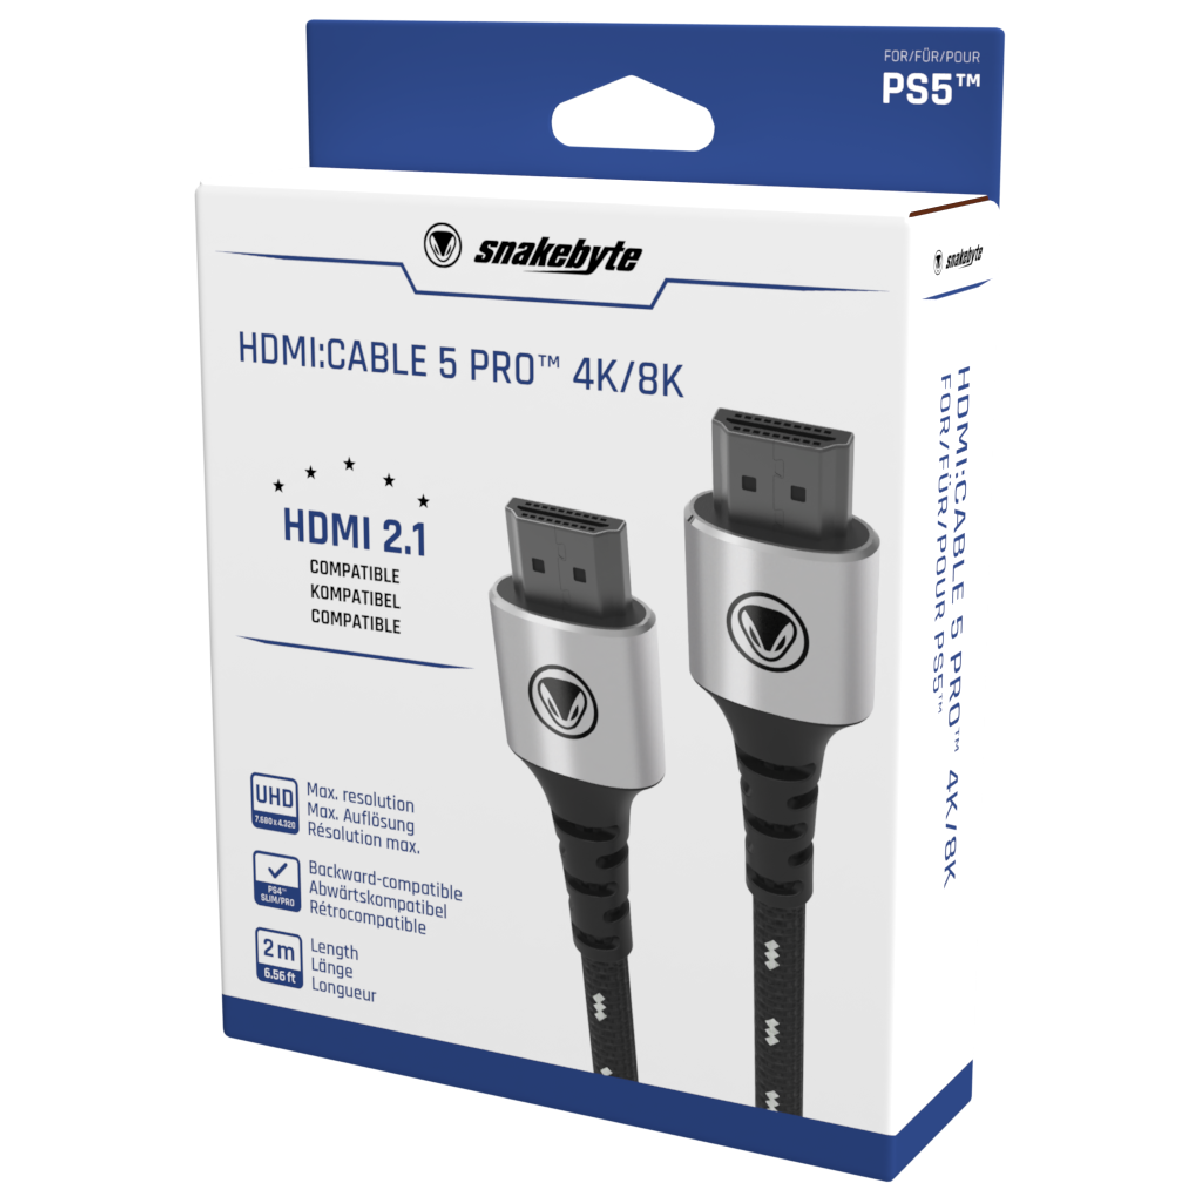 HDMI:CABLE 5 PRO 4K/8K